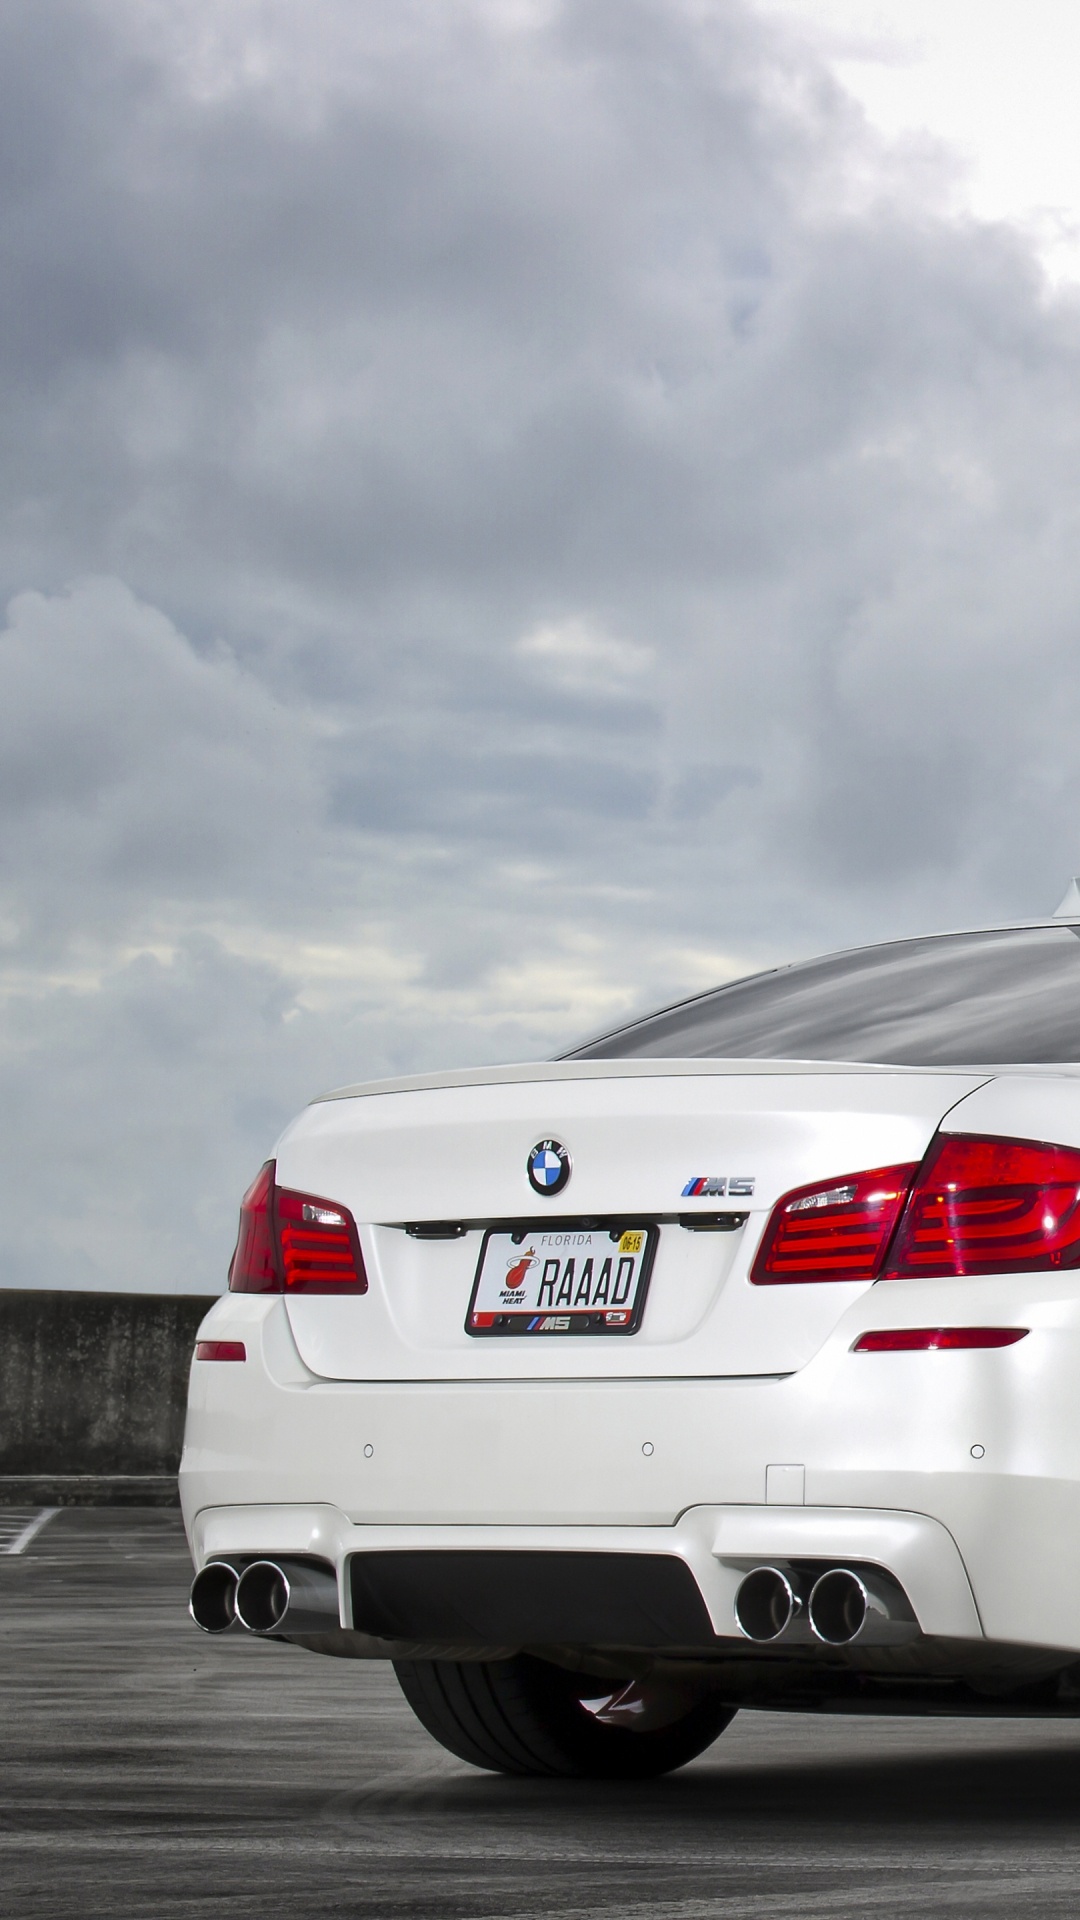 White Bmw m 3 Coupe on Gray Asphalt Road. Wallpaper in 1080x1920 Resolution